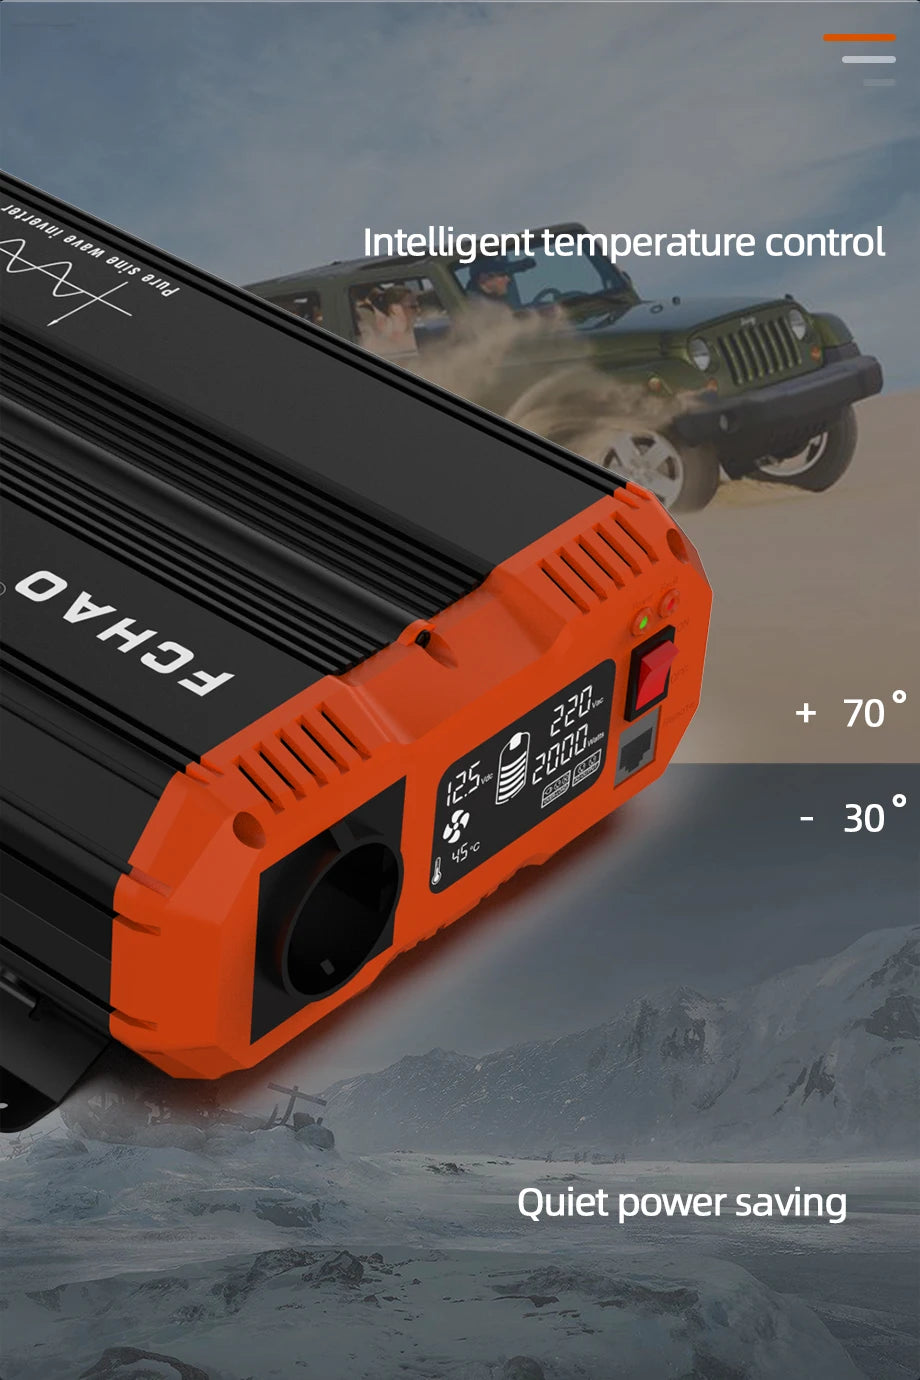 FCHAO 2400W Solar Panel Inverter, High-quality inverter for RVs and trucks, featuring pure sine wave, temperature control, and energy-saving technology.